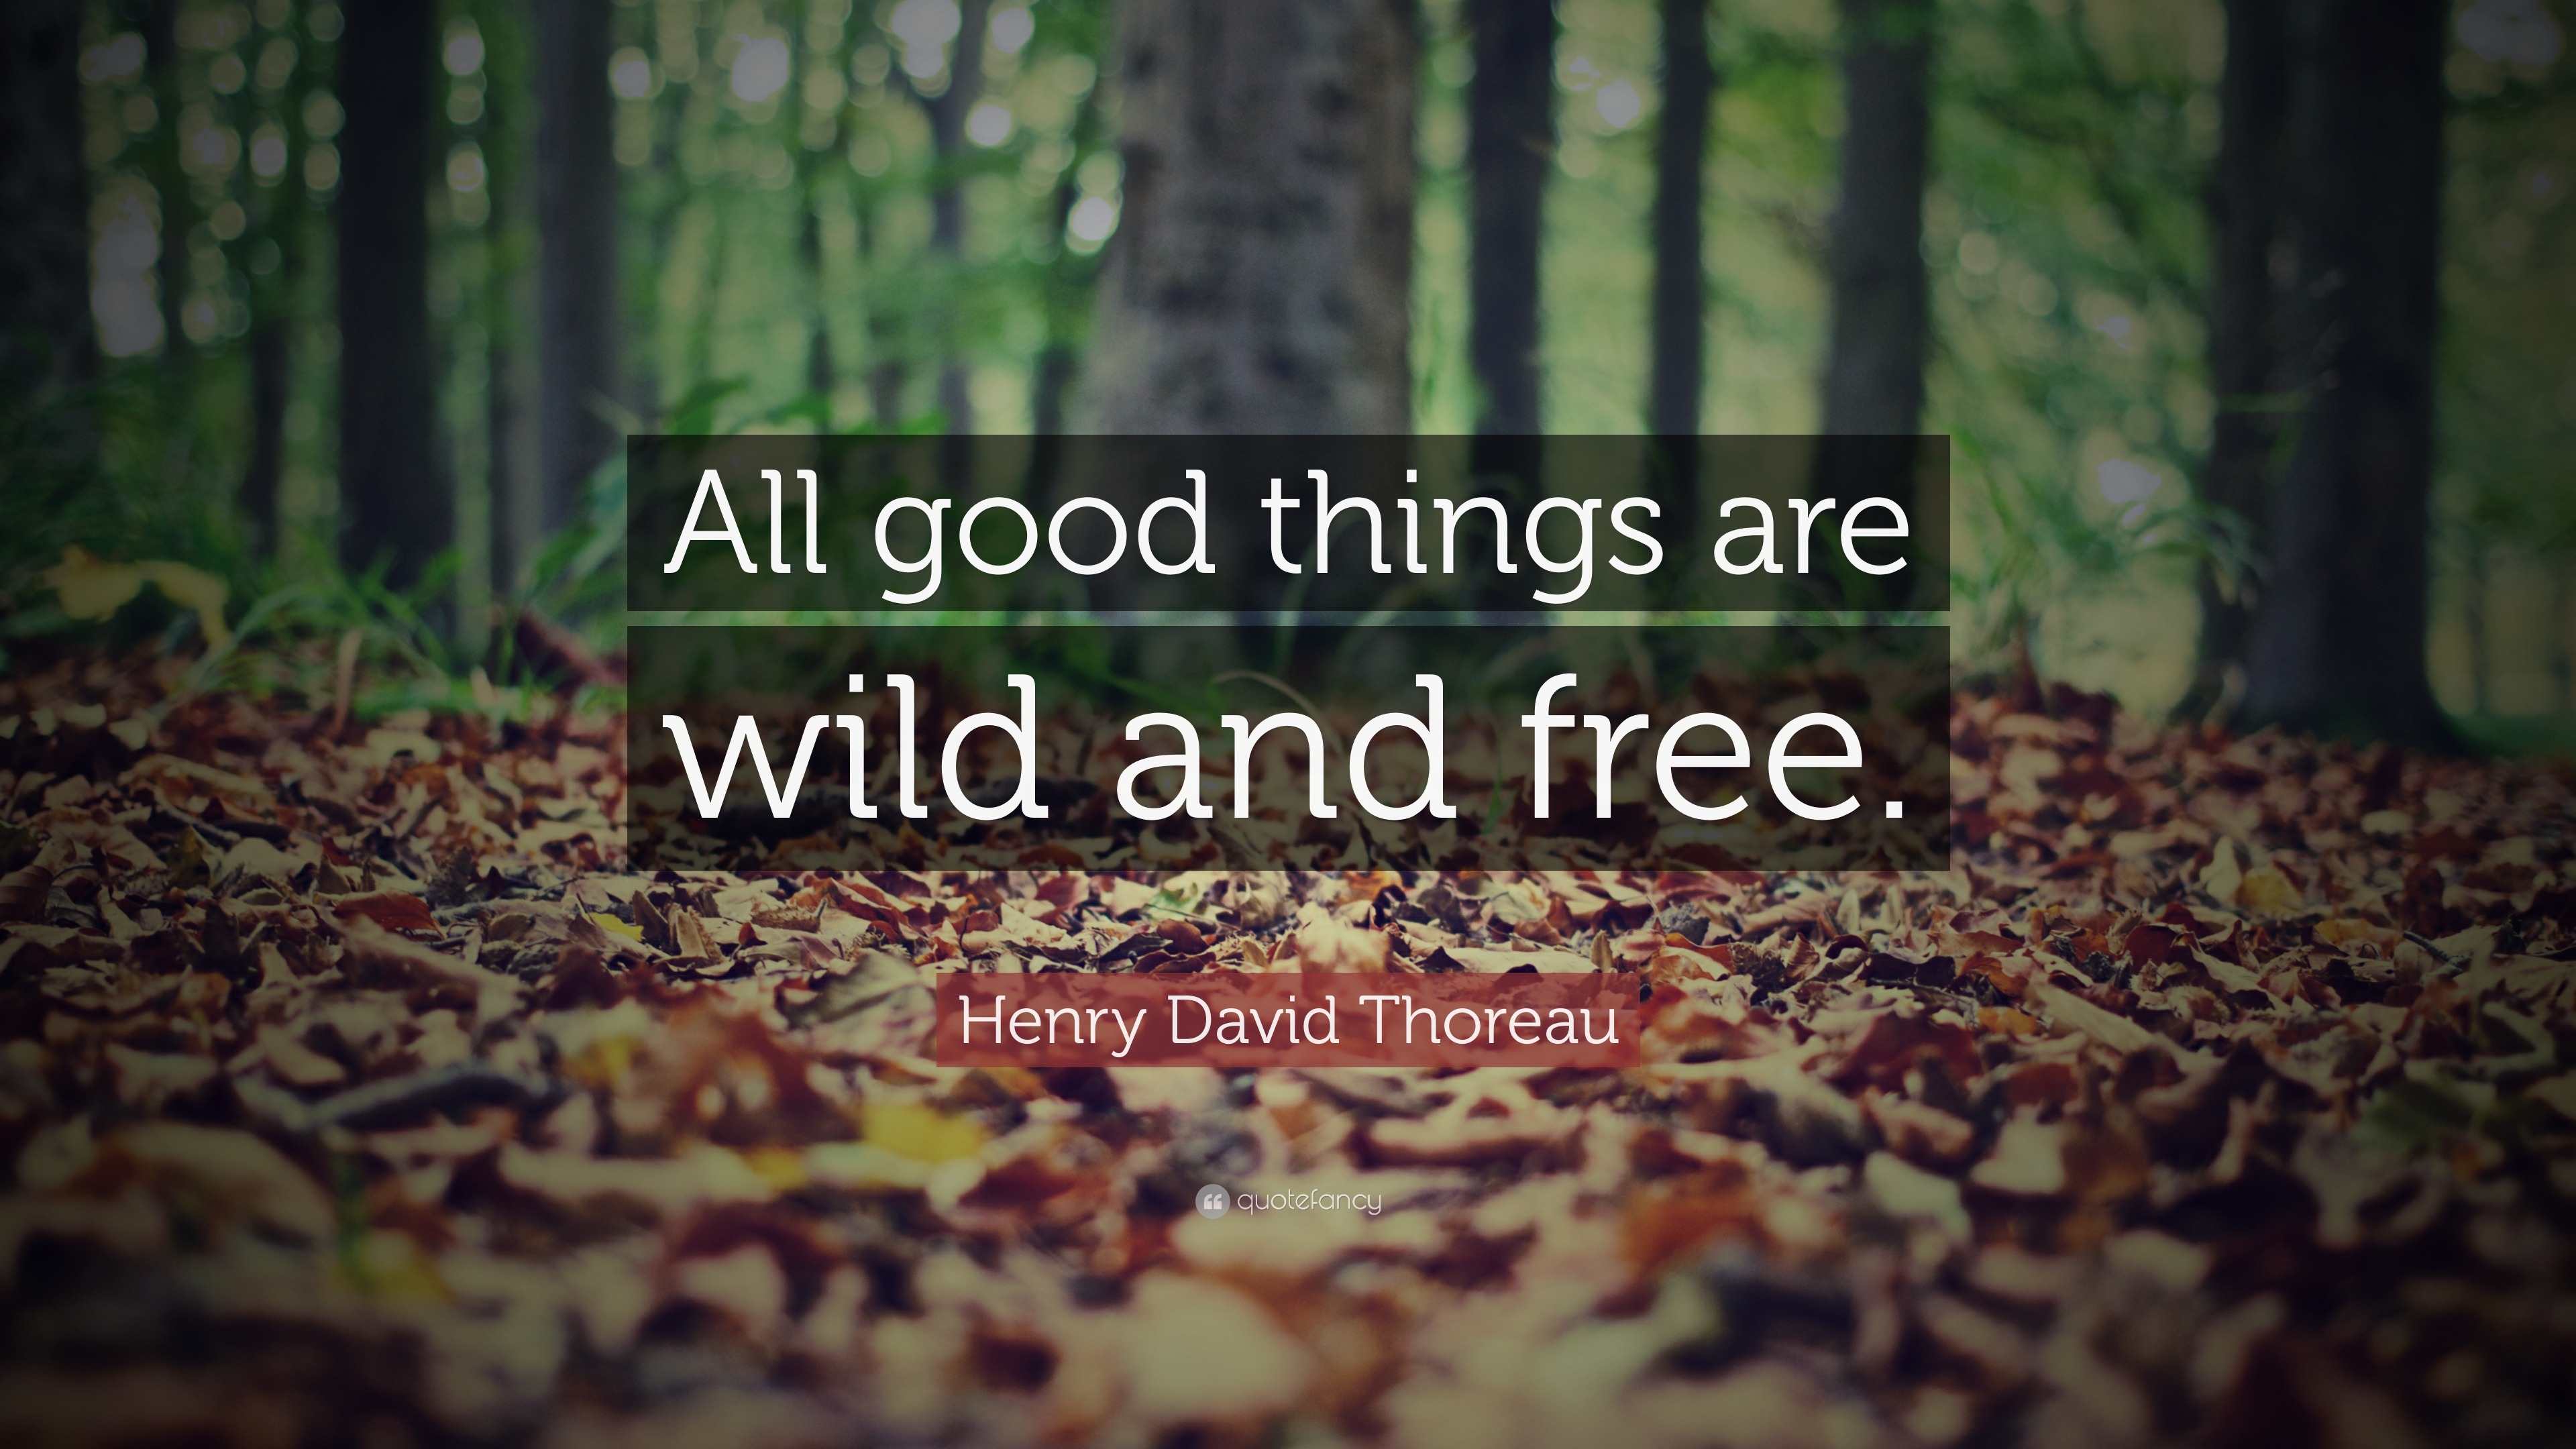 Henry David Thoreau Quote: "All good things are wild and free." (22 wallpapers) - Quotefancy